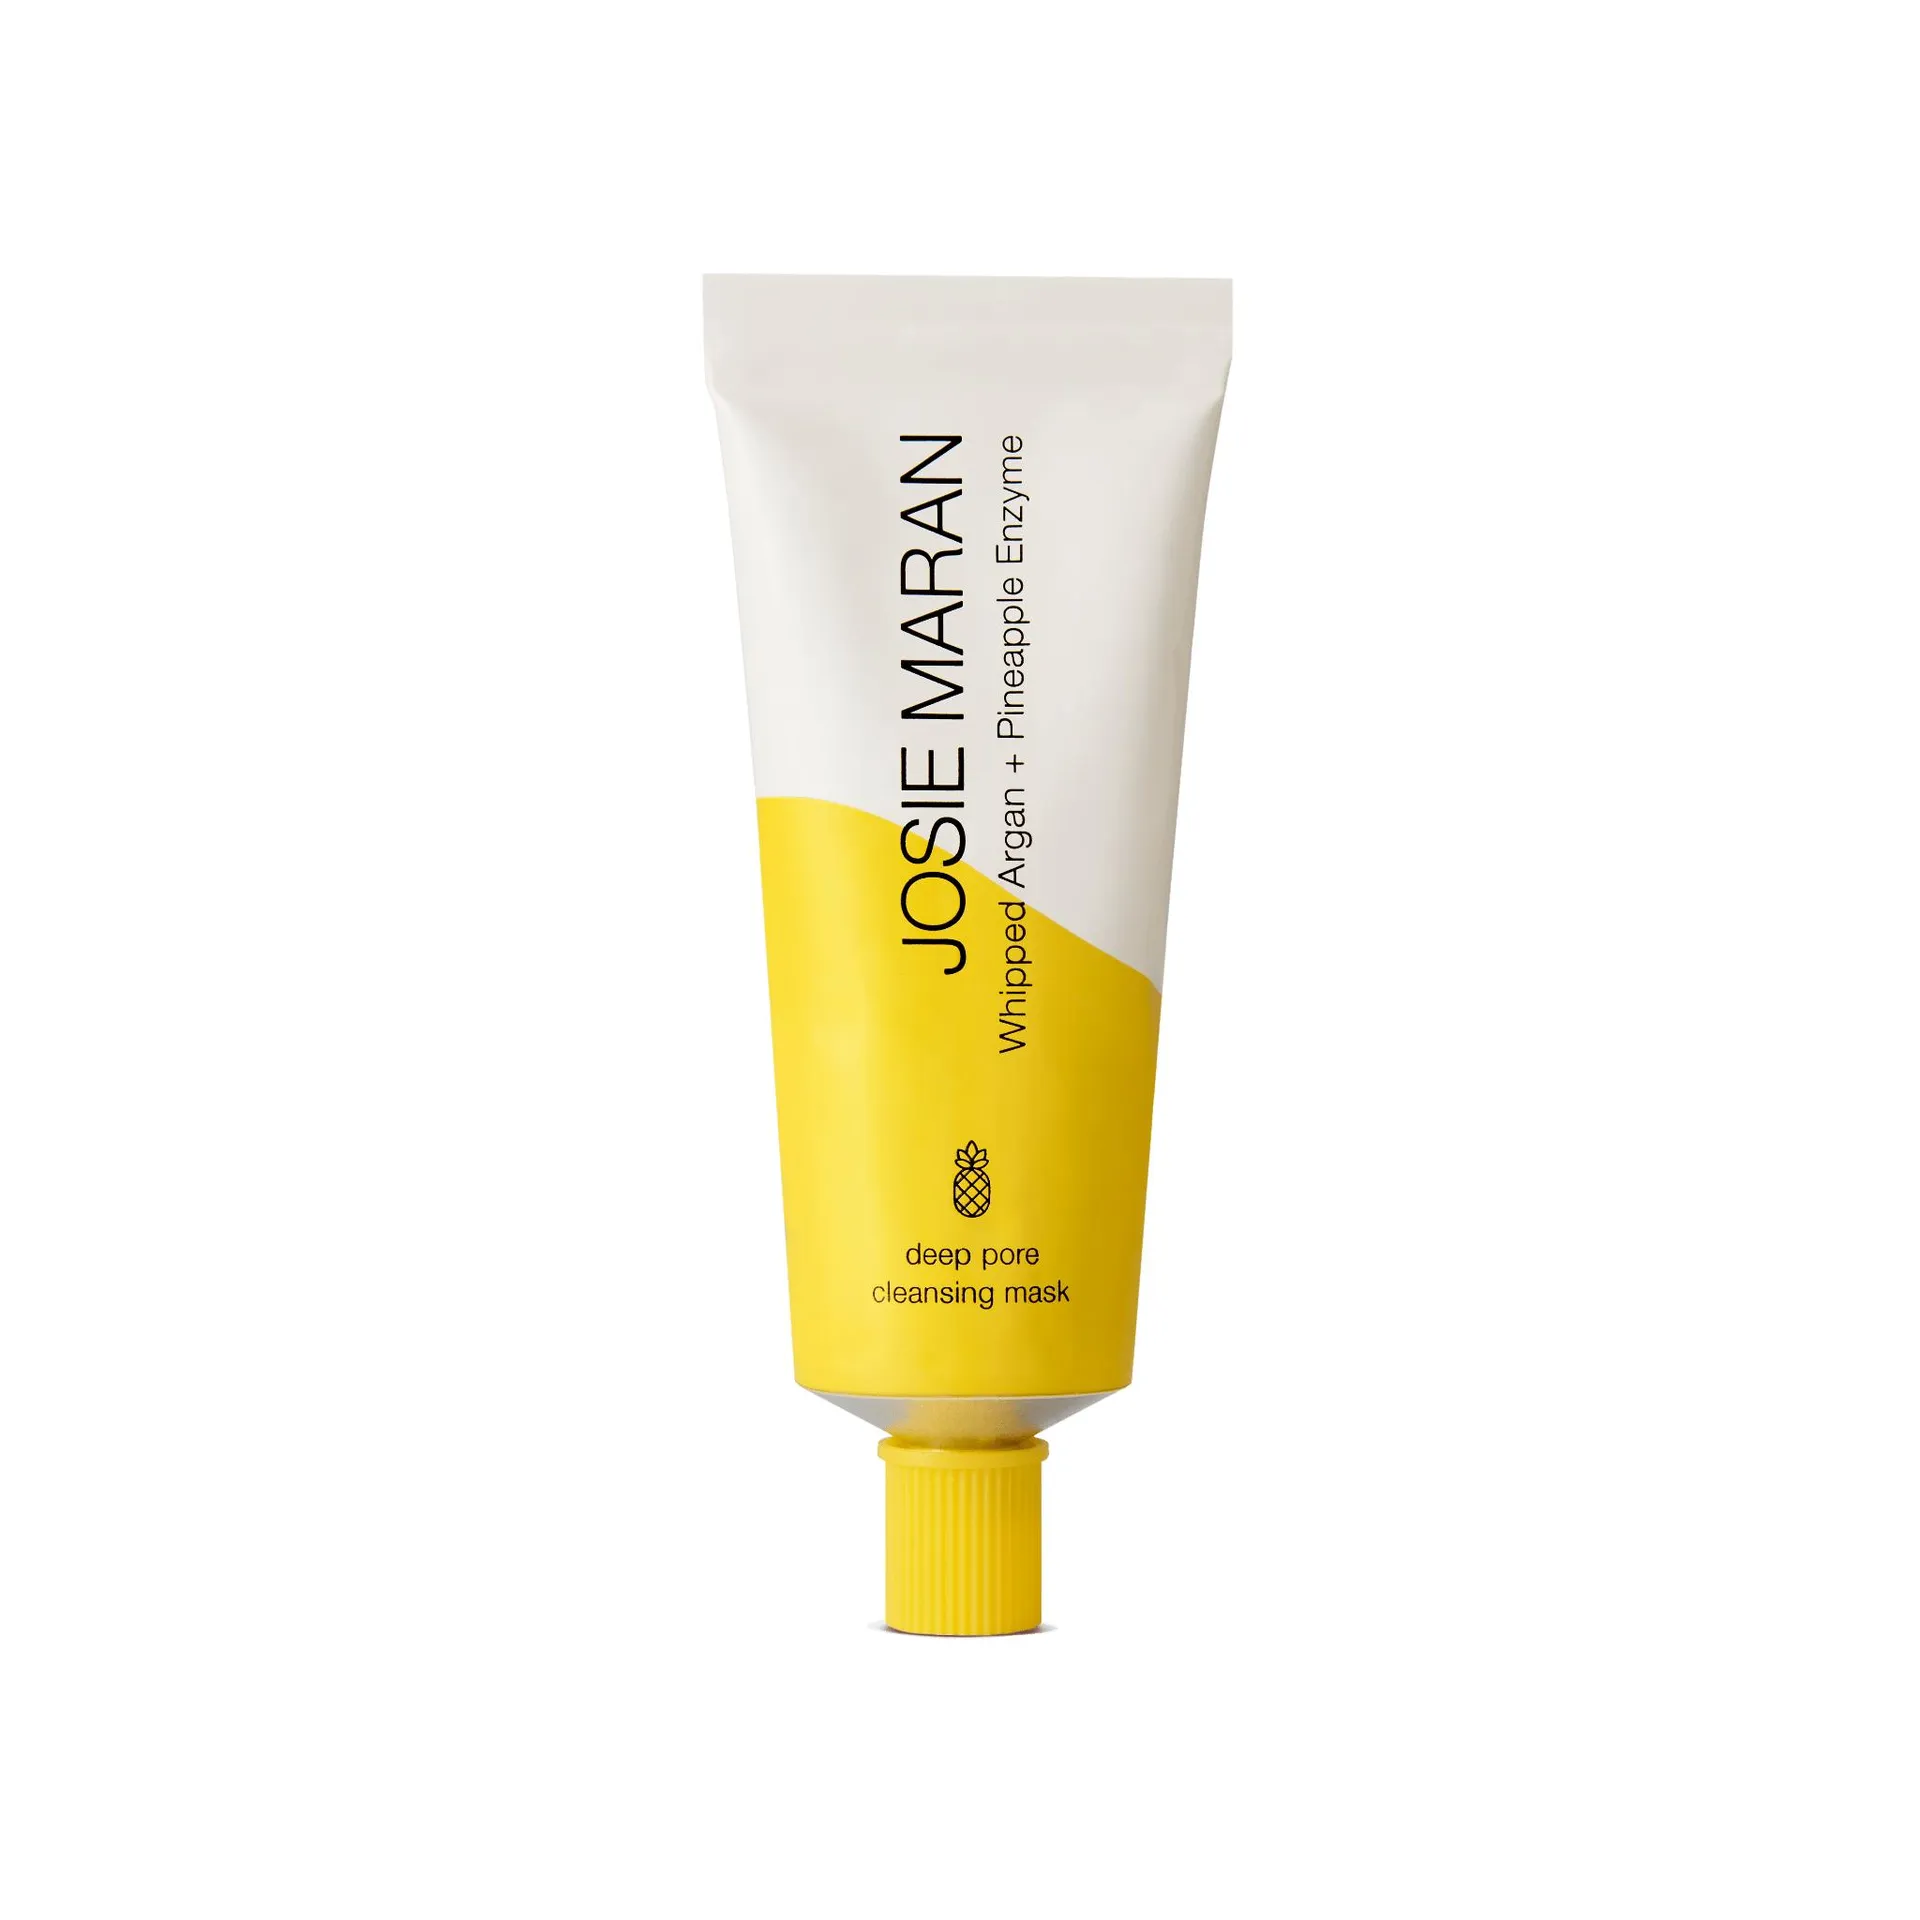 Whipped Argan + Pineapple Enzyme Deep Pore Cleansing Mask